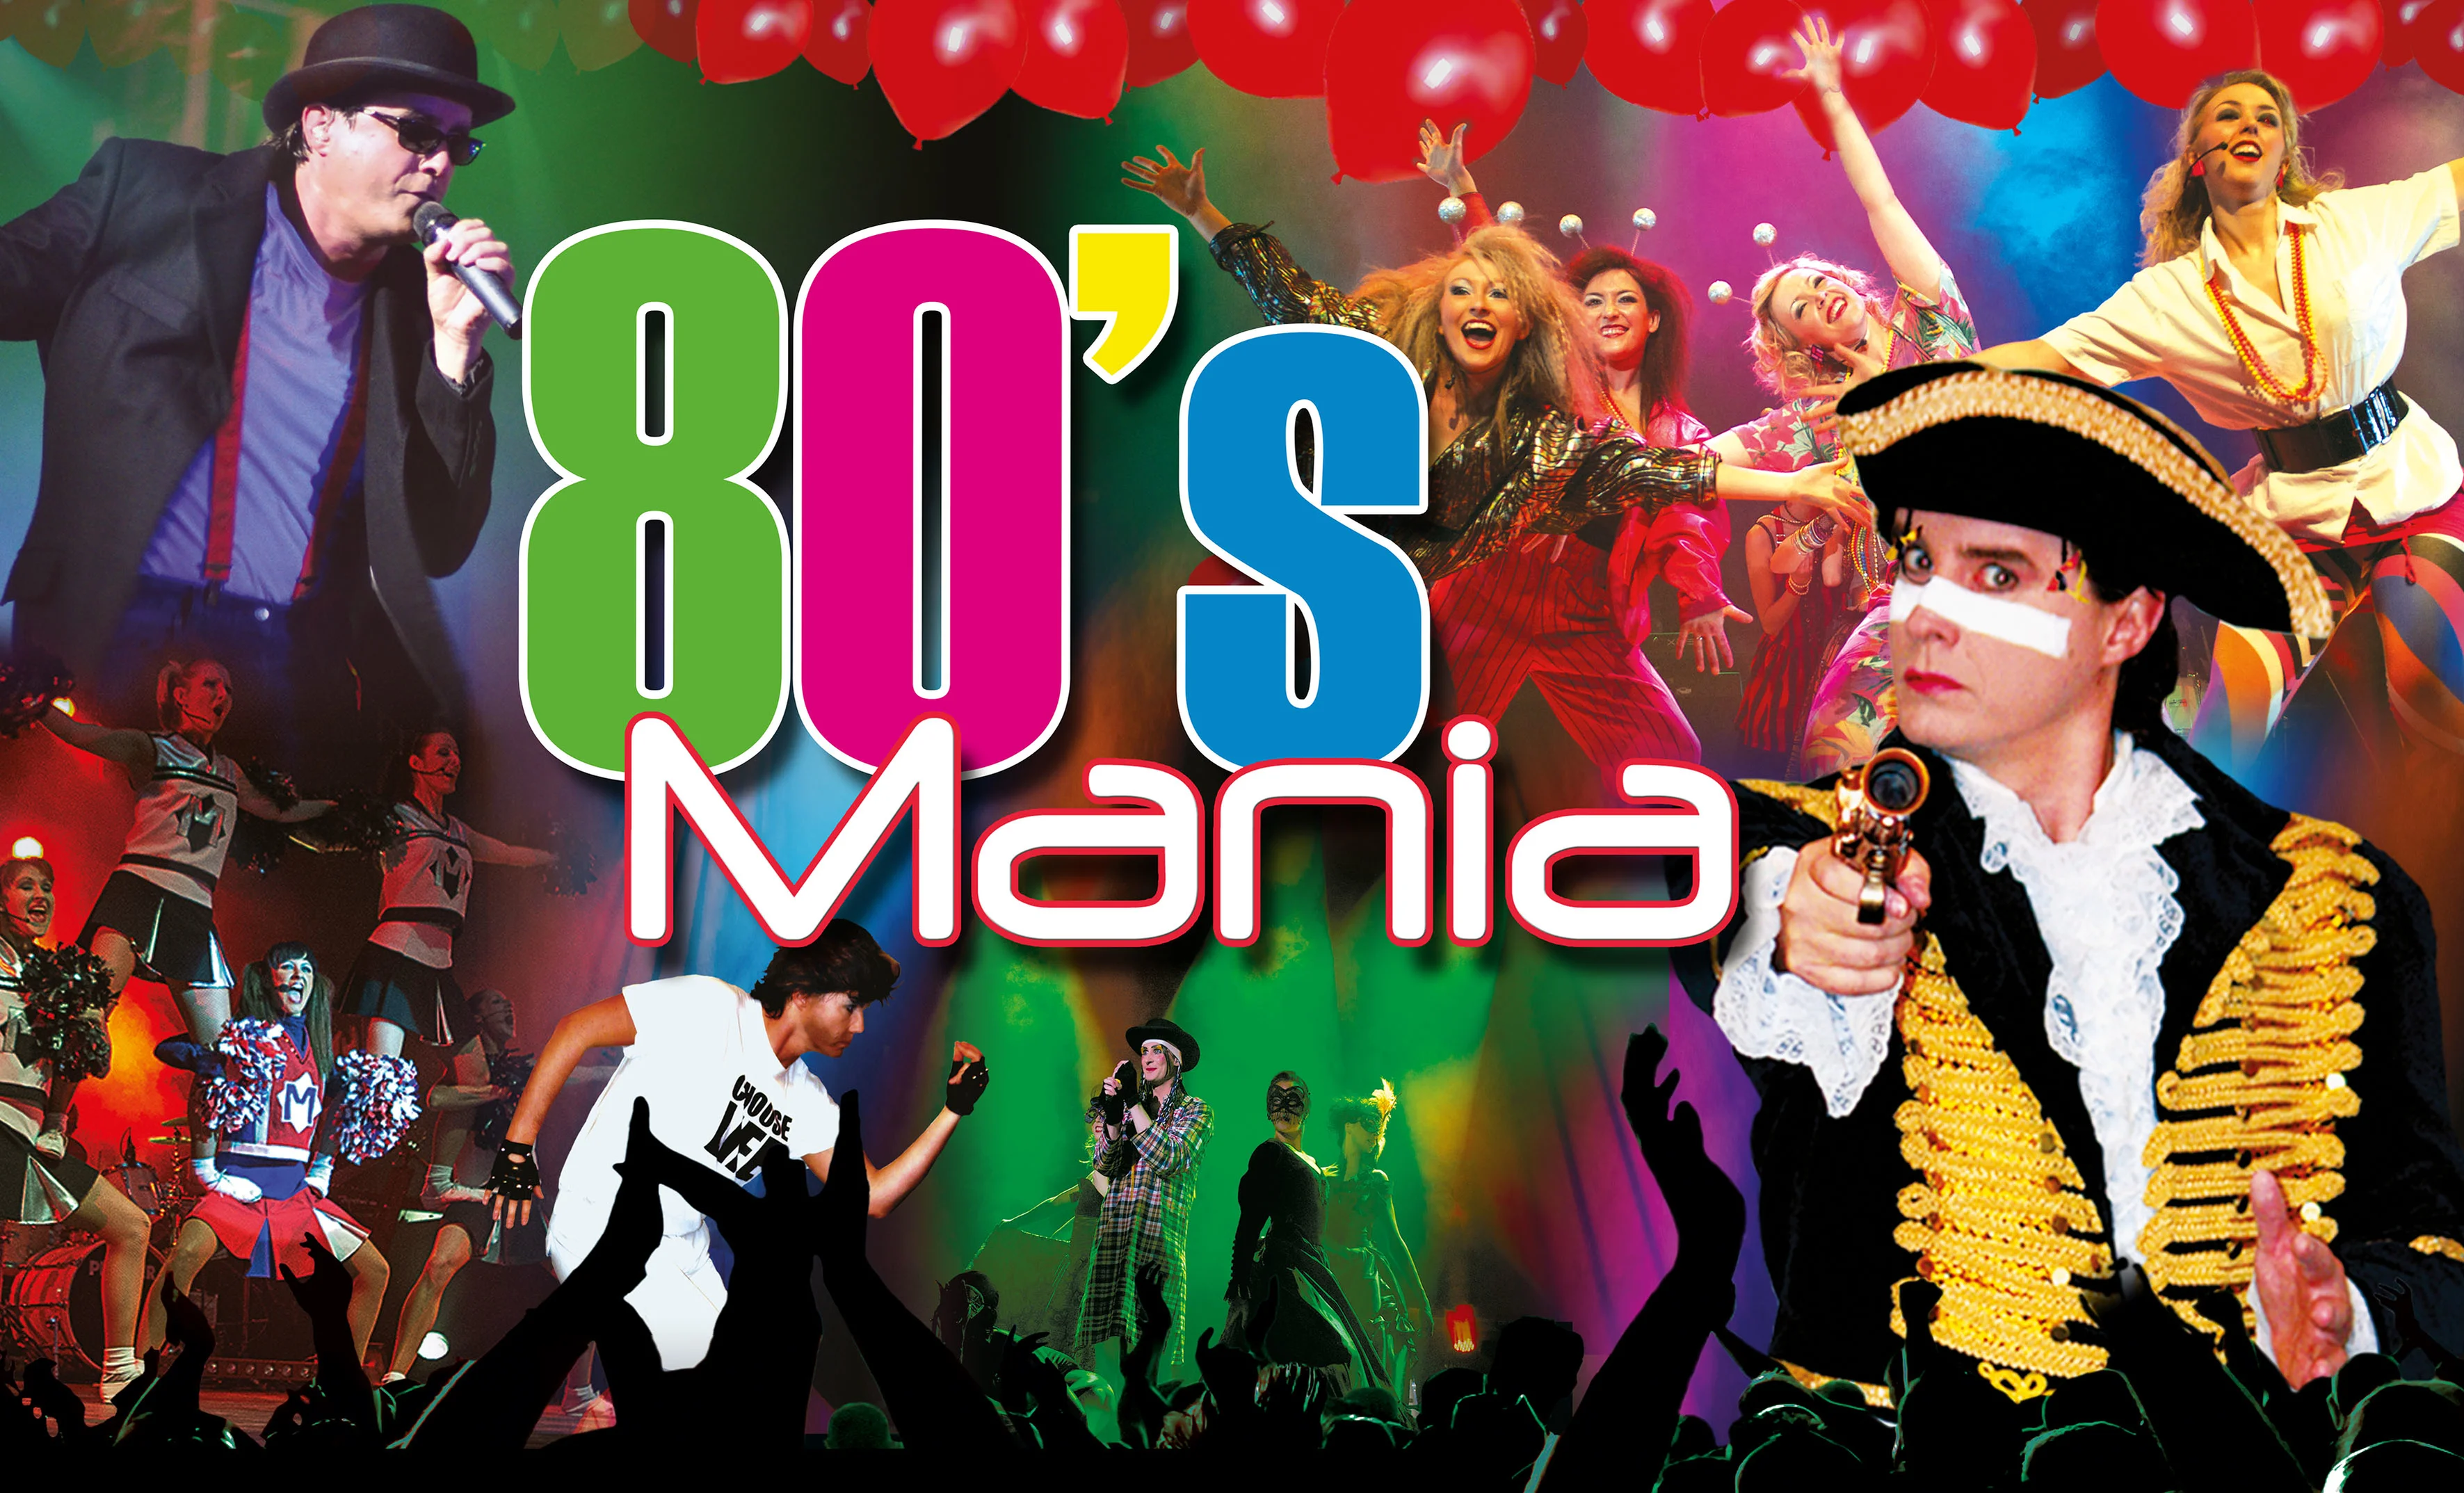 Maniac 80s. Culture Club. Show 80s. Music Groups 80s.